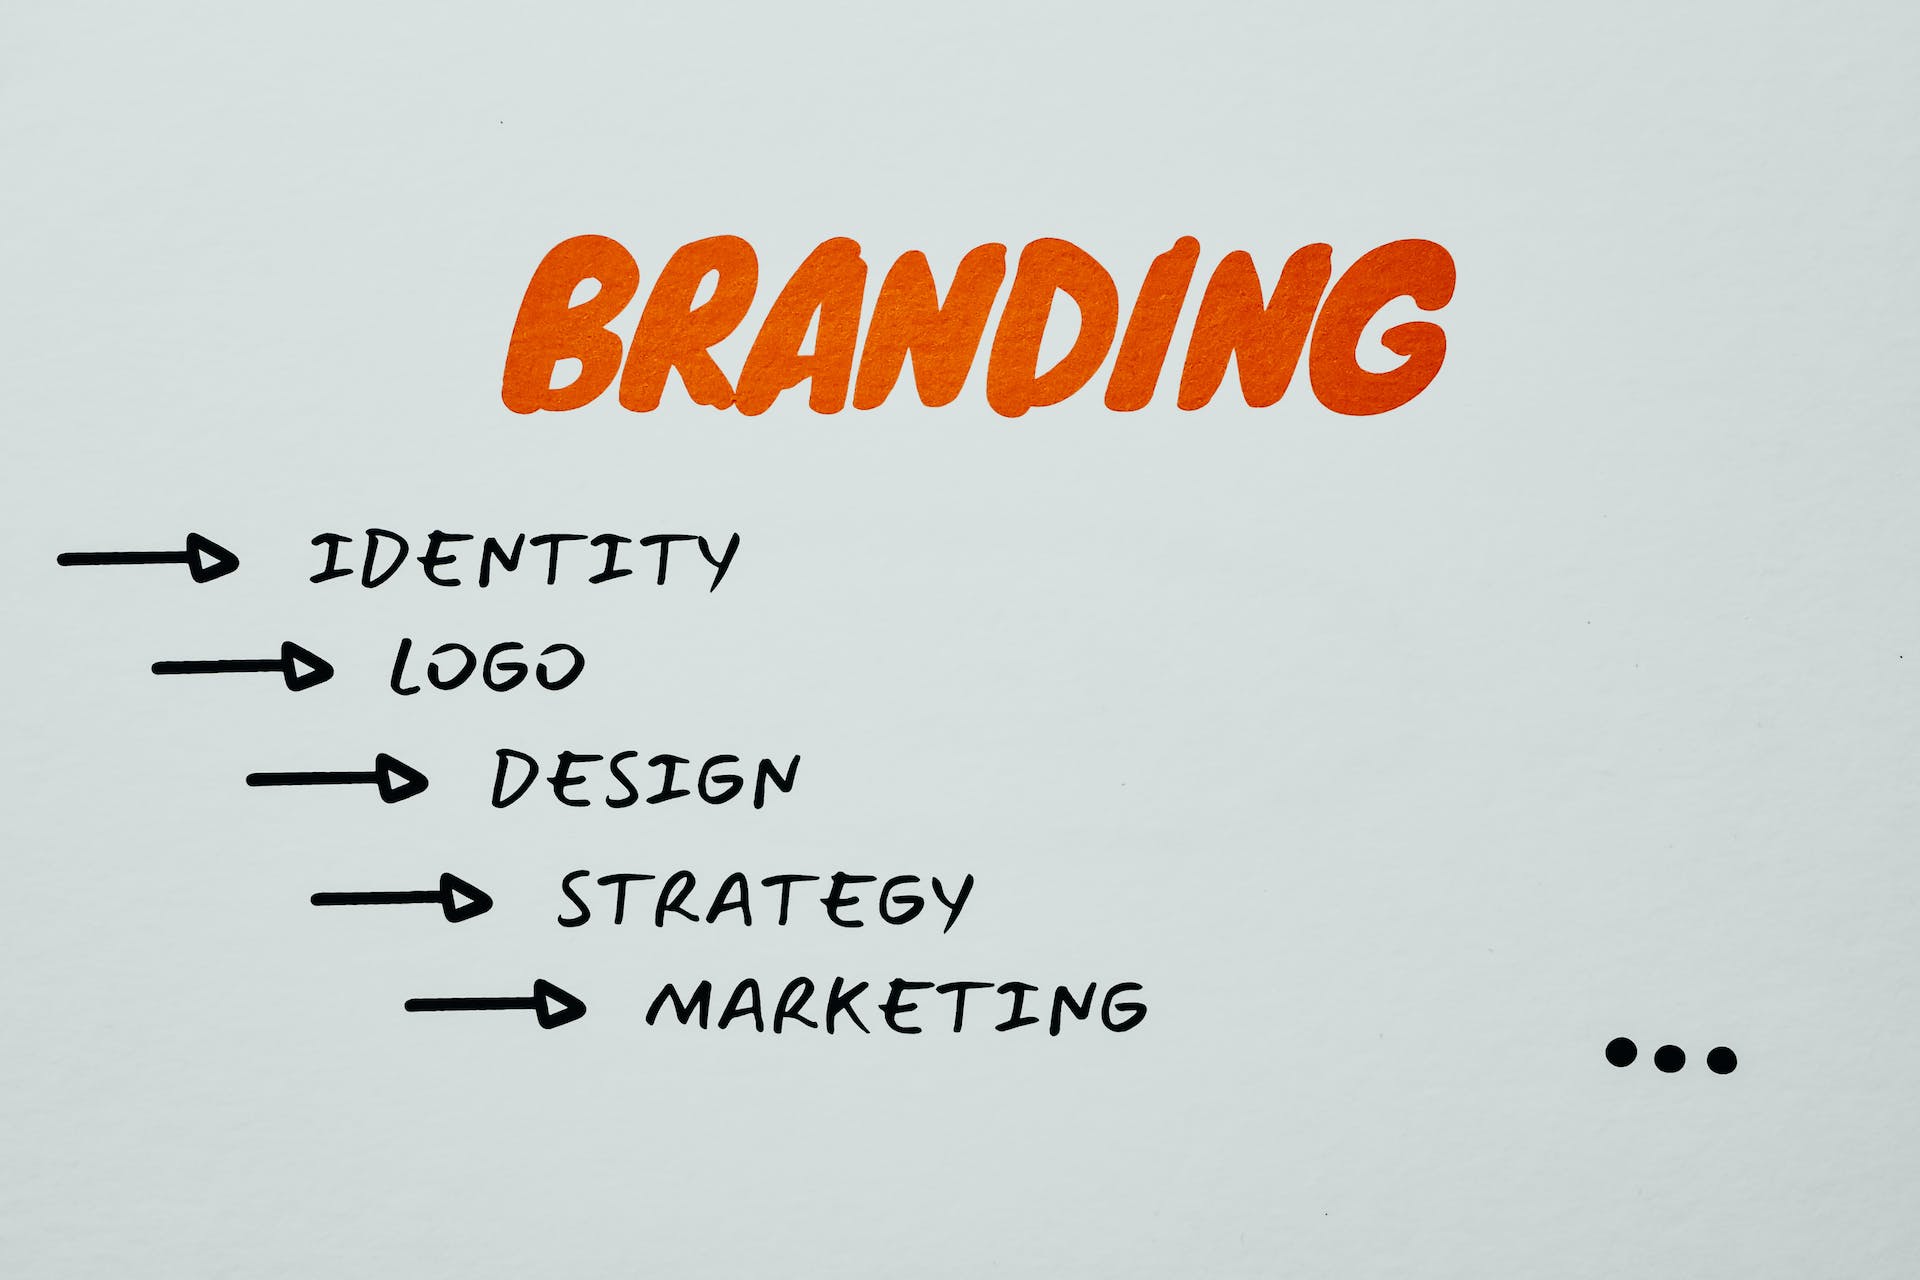 Green Dial's Branding Services